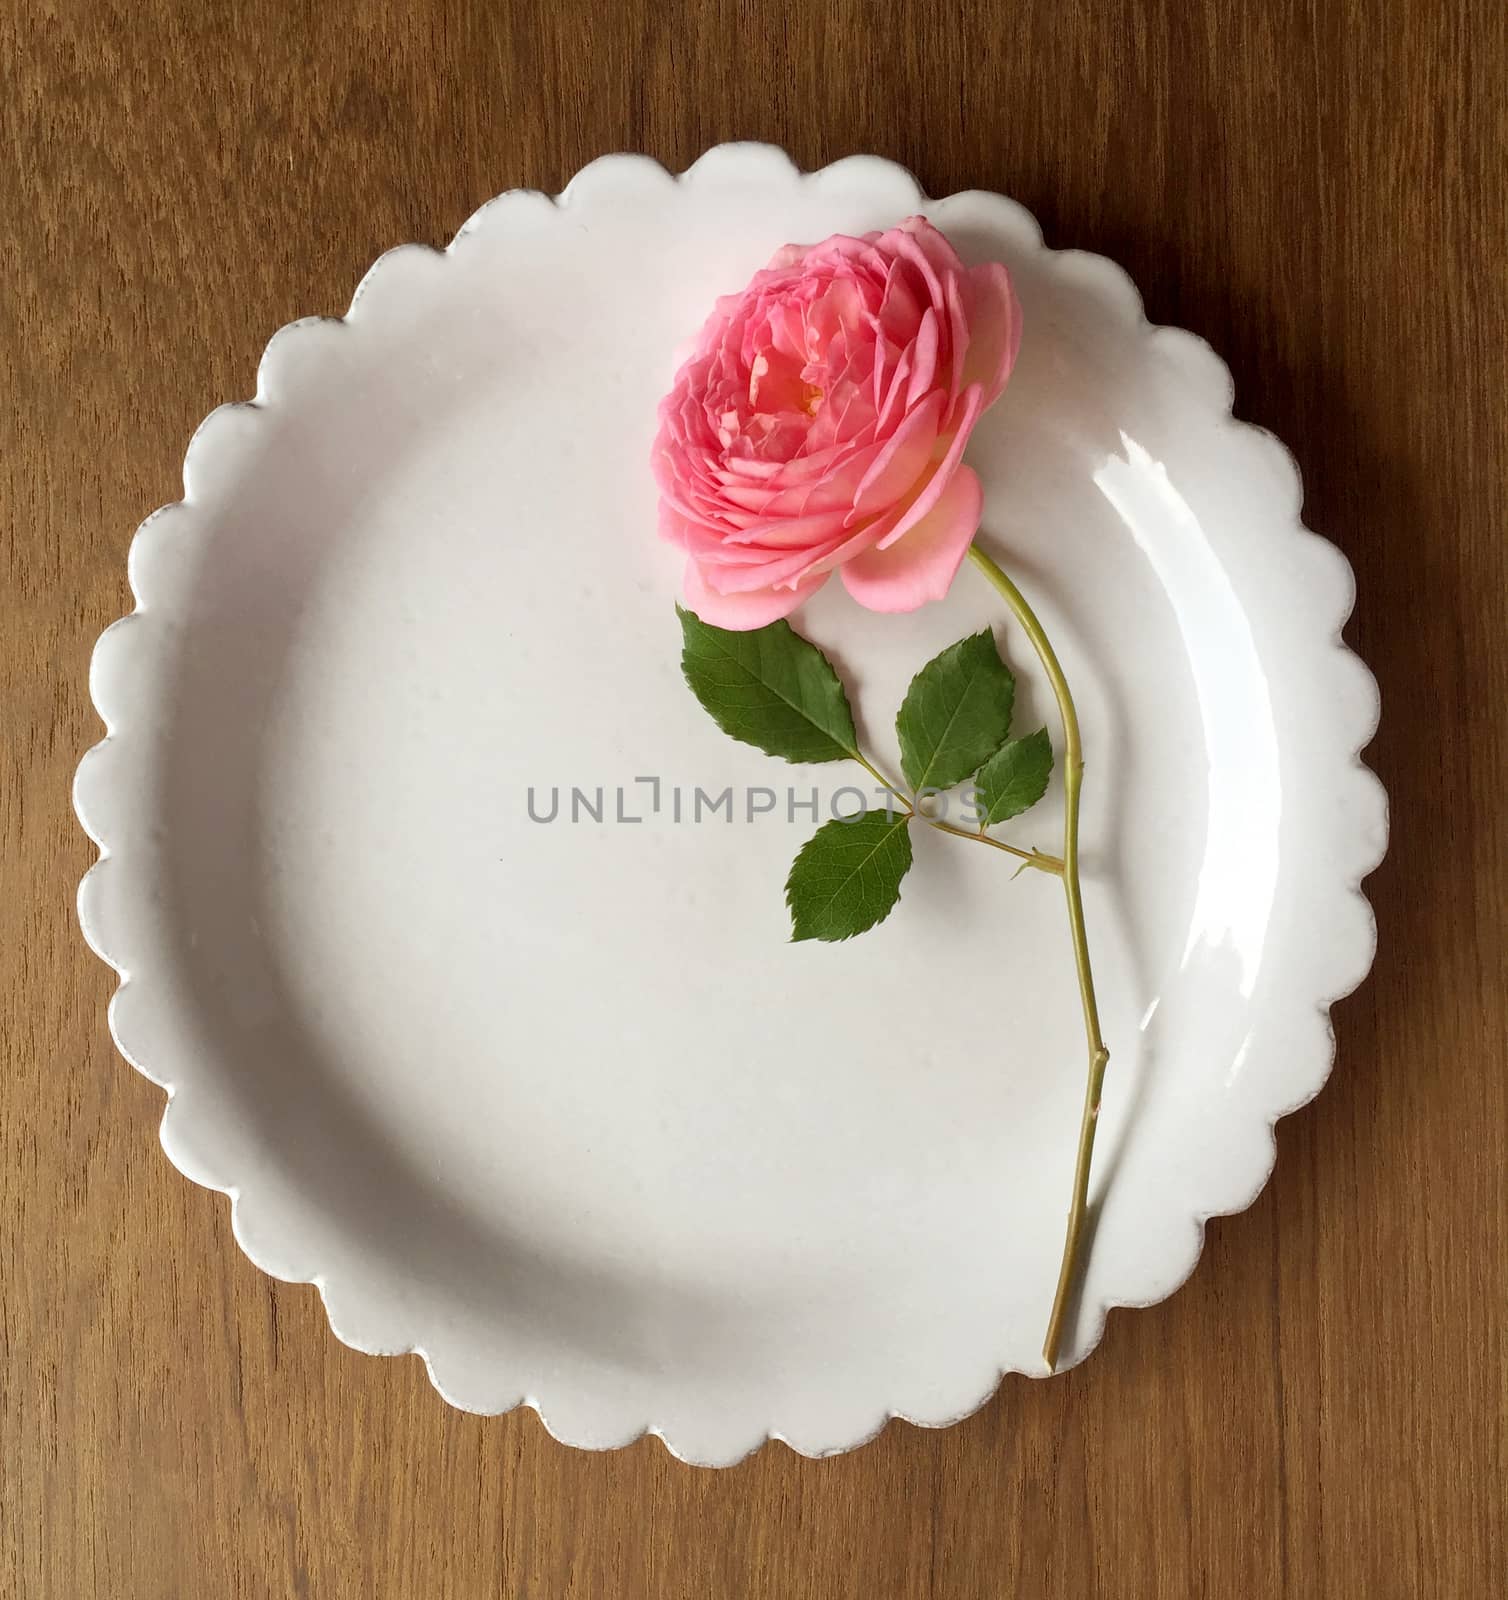 Beautiful roses lay on a white plate with wooden flooring.